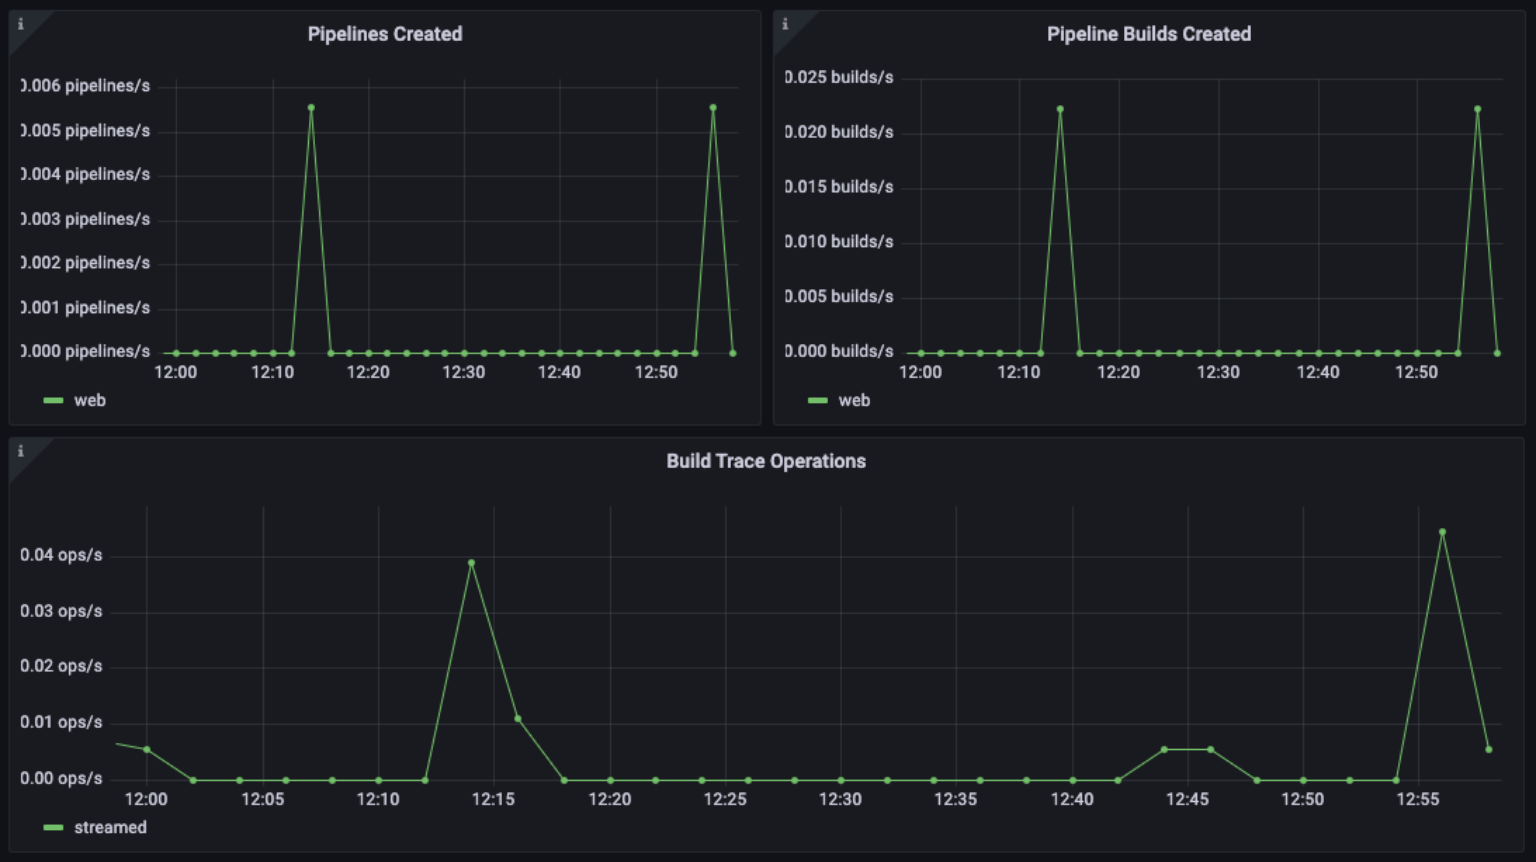 A Grafana dashboard displays a GitLab instance's pipelines created, pipeline builds created, and build trace operations.